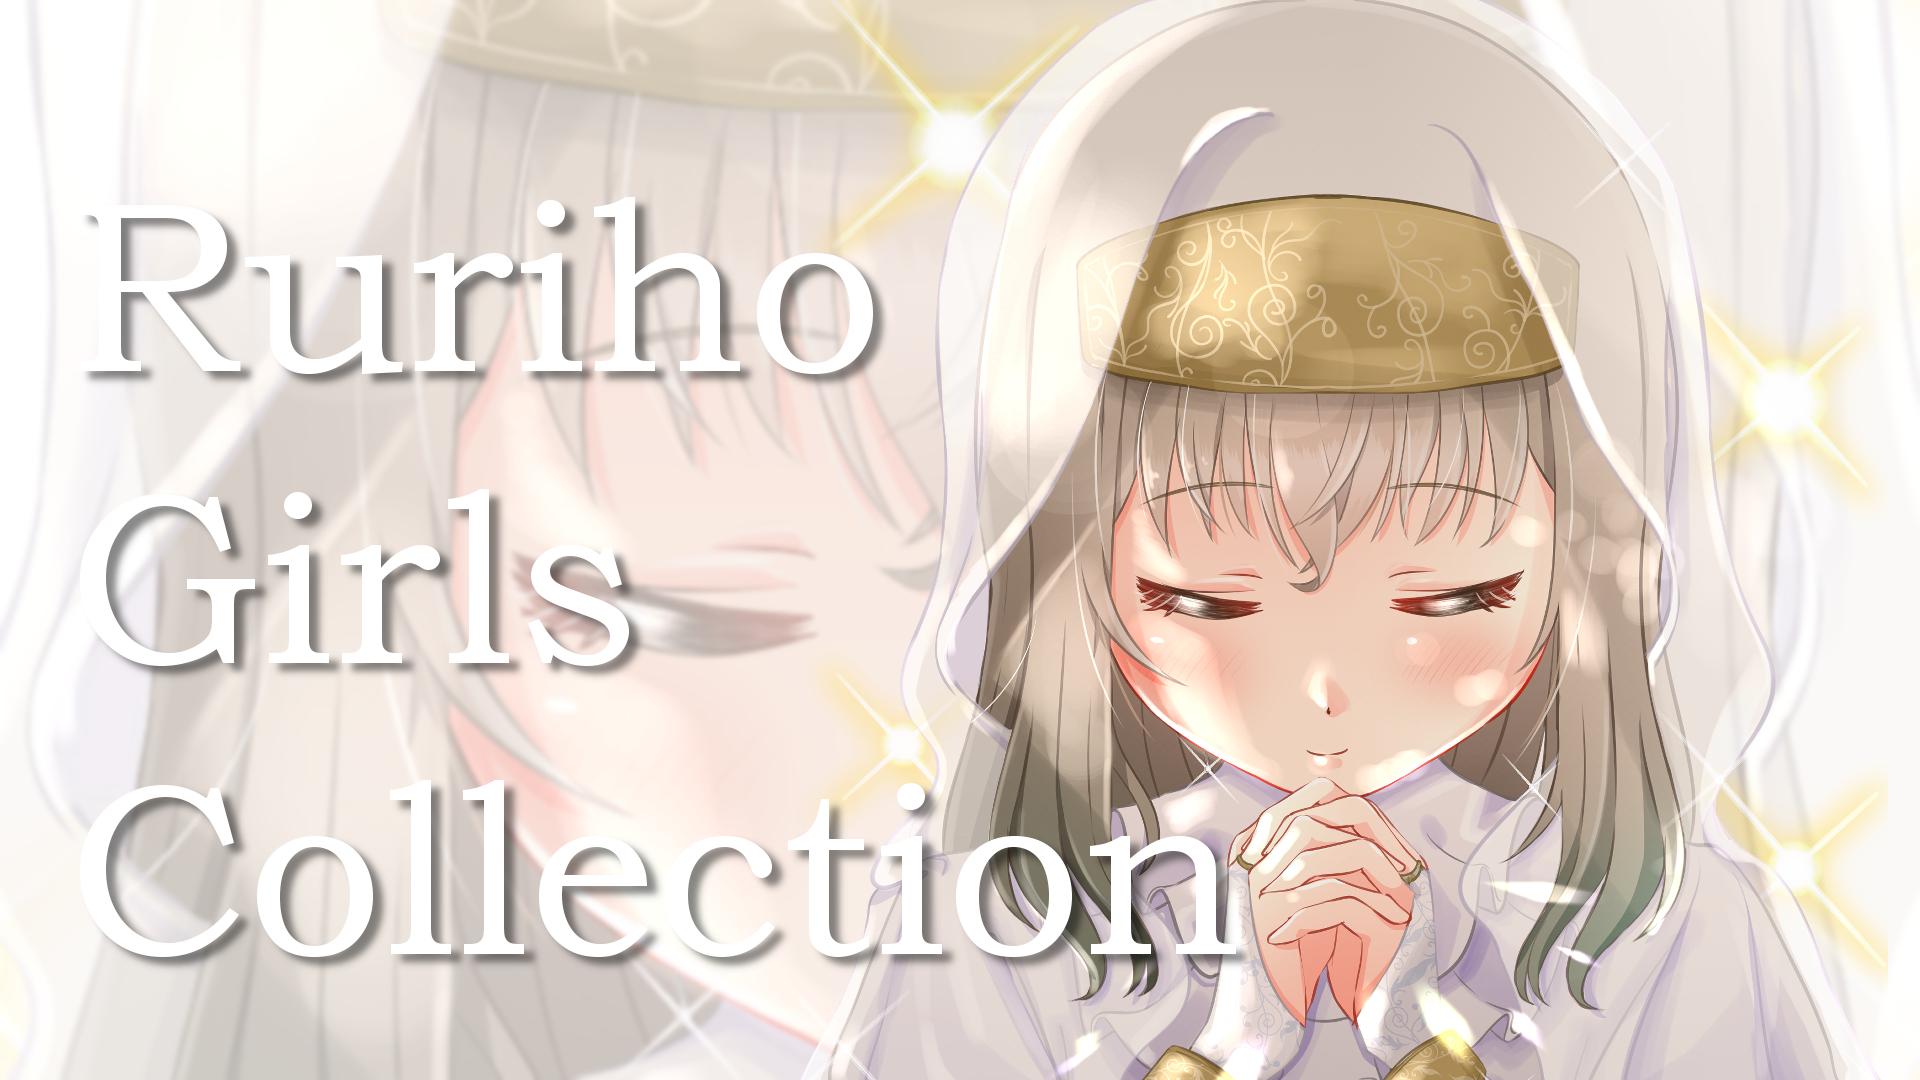 Ruriho Girls Collection